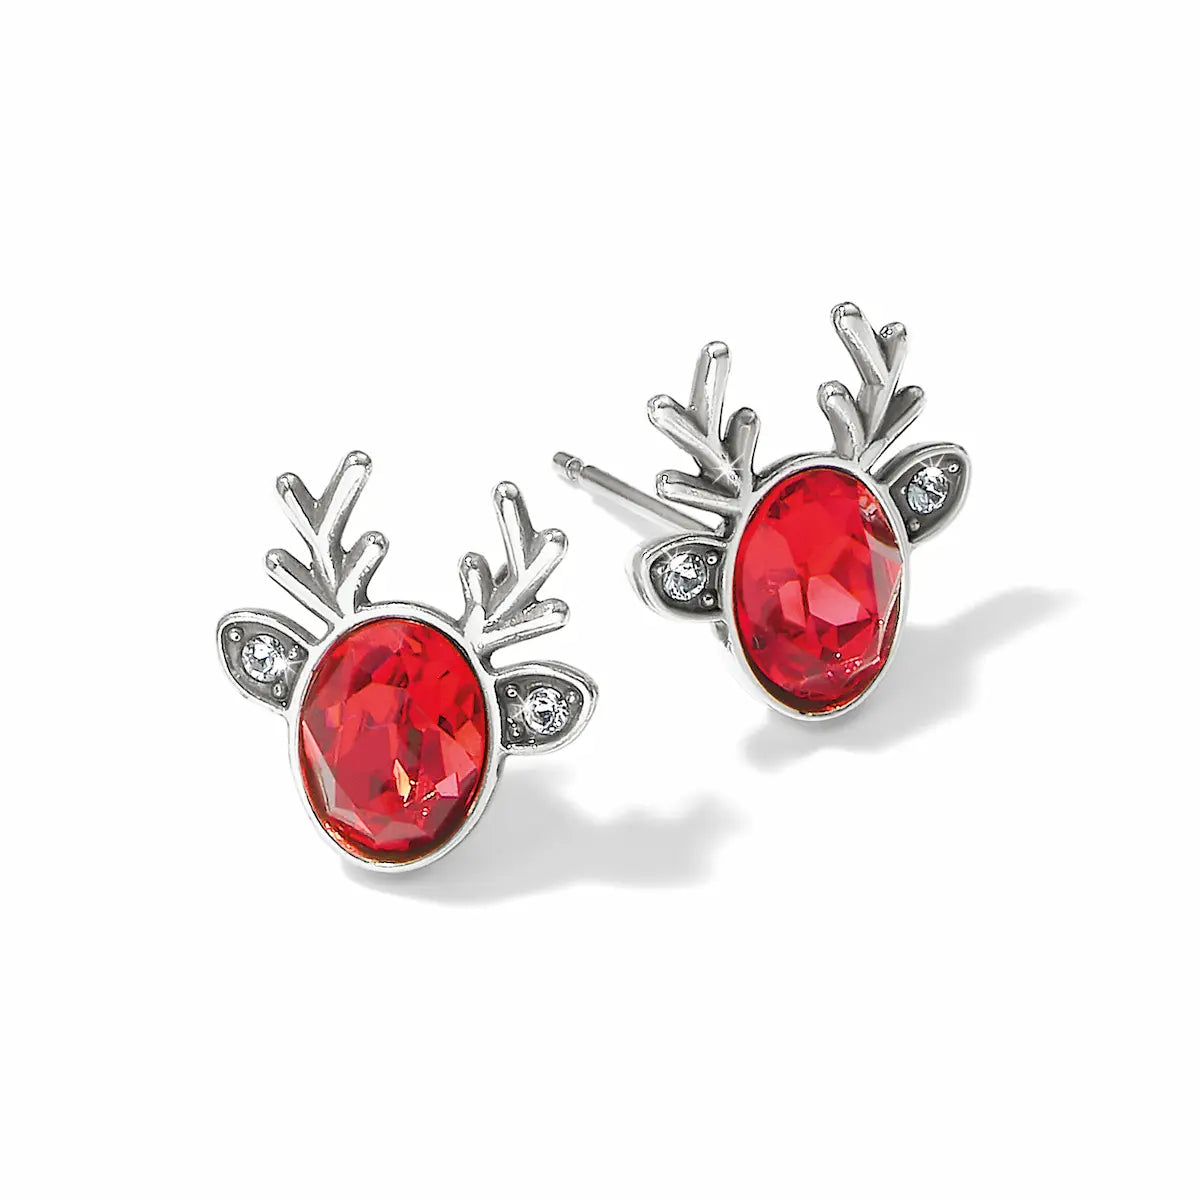 Reindeer Glitz Red Mini Post Earrings in Silver and Red